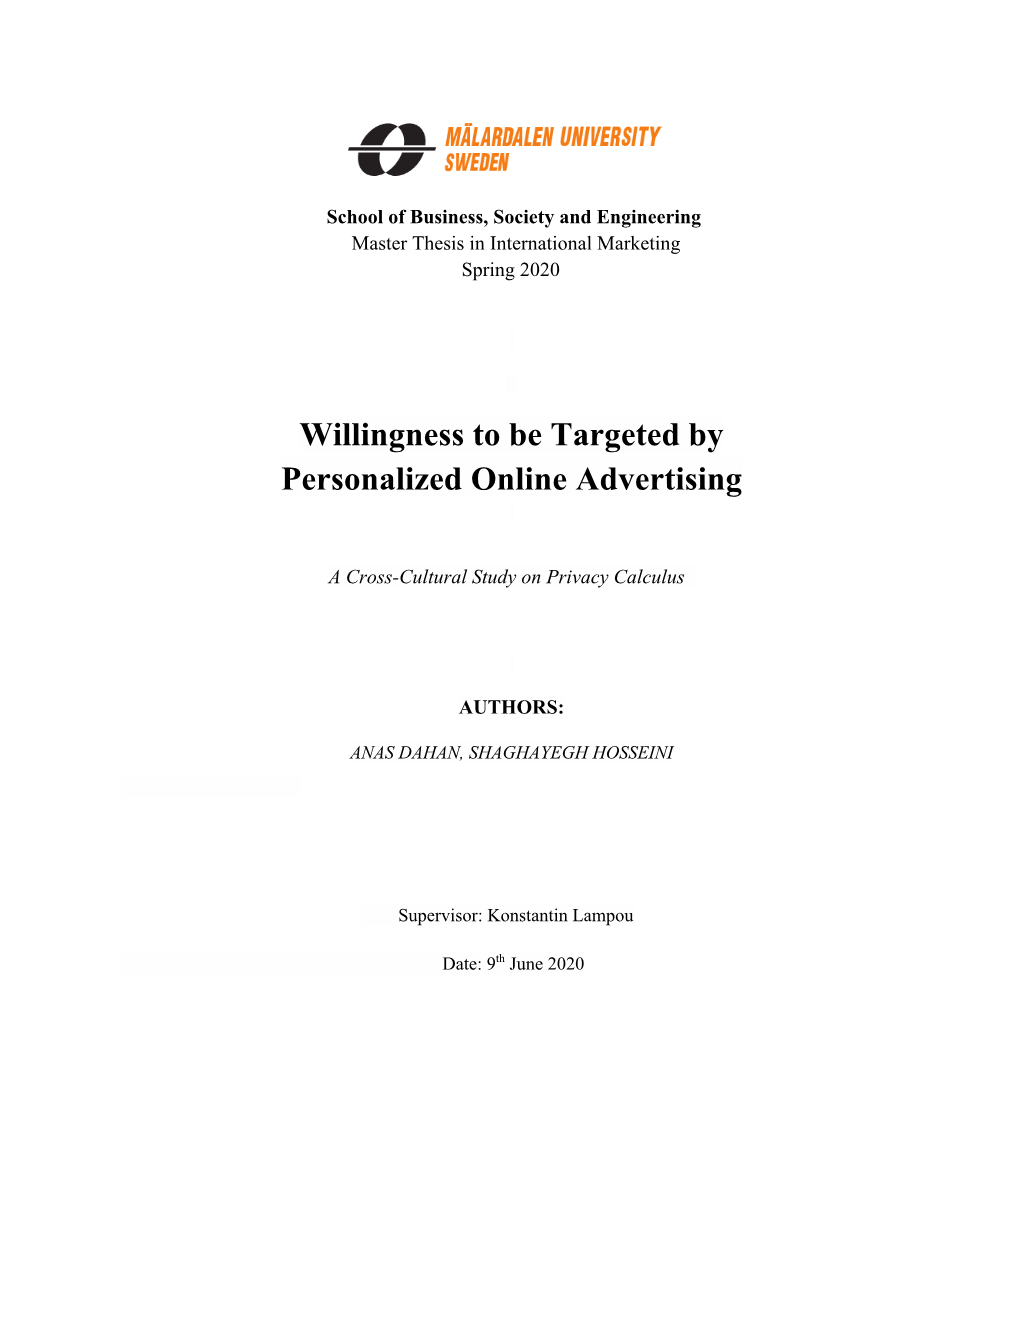 Willingness to Be Targeted by Personalized Online Advertising